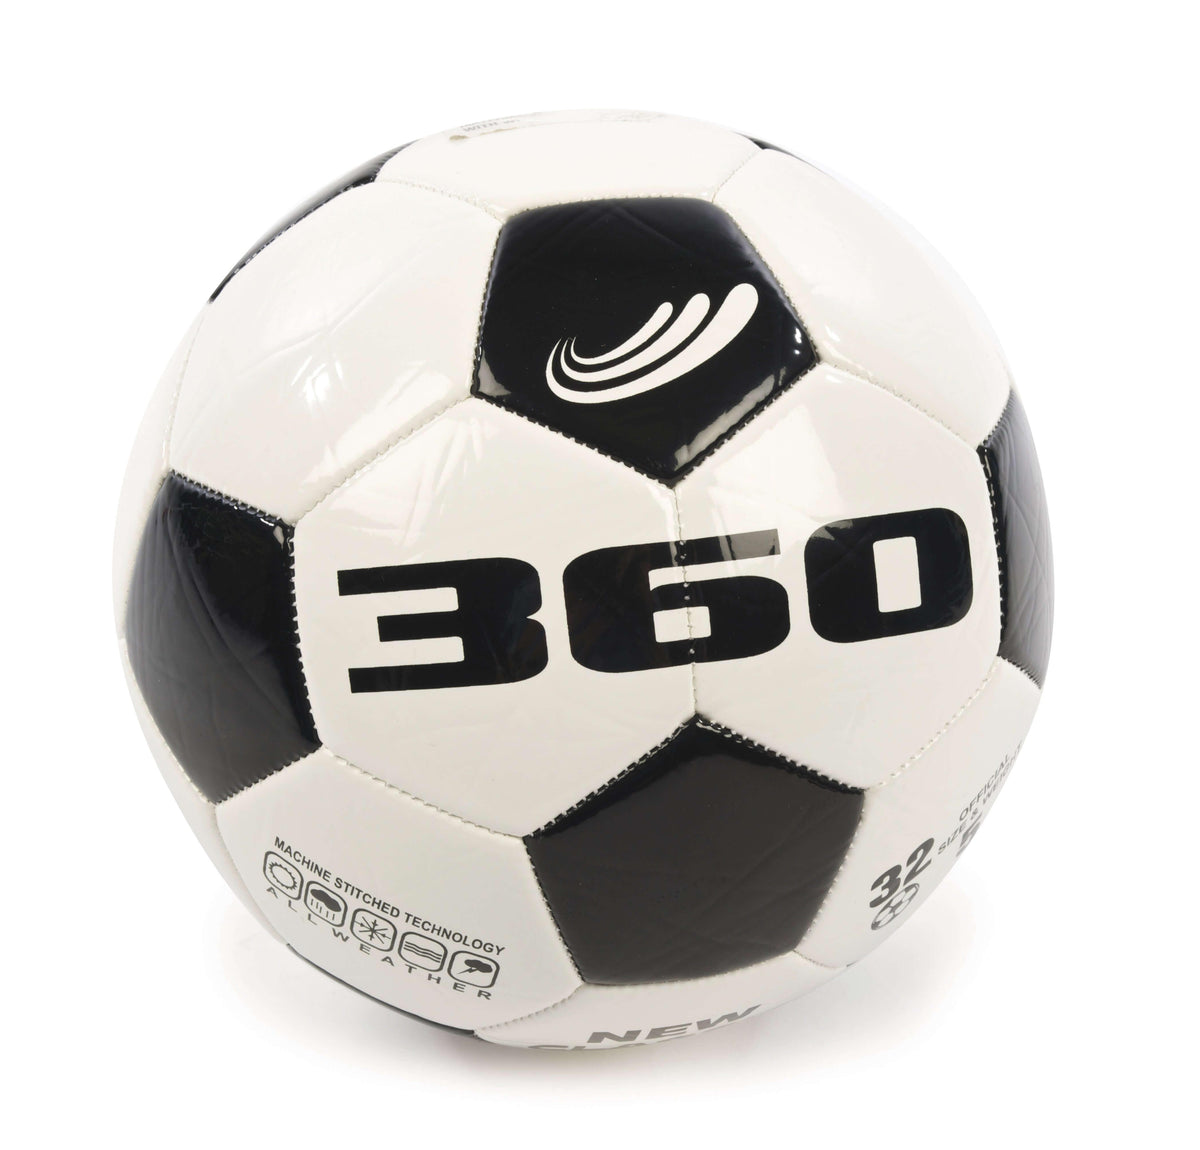 360 CLASSIC SOCCER BALL - Marcotte Sports Inc